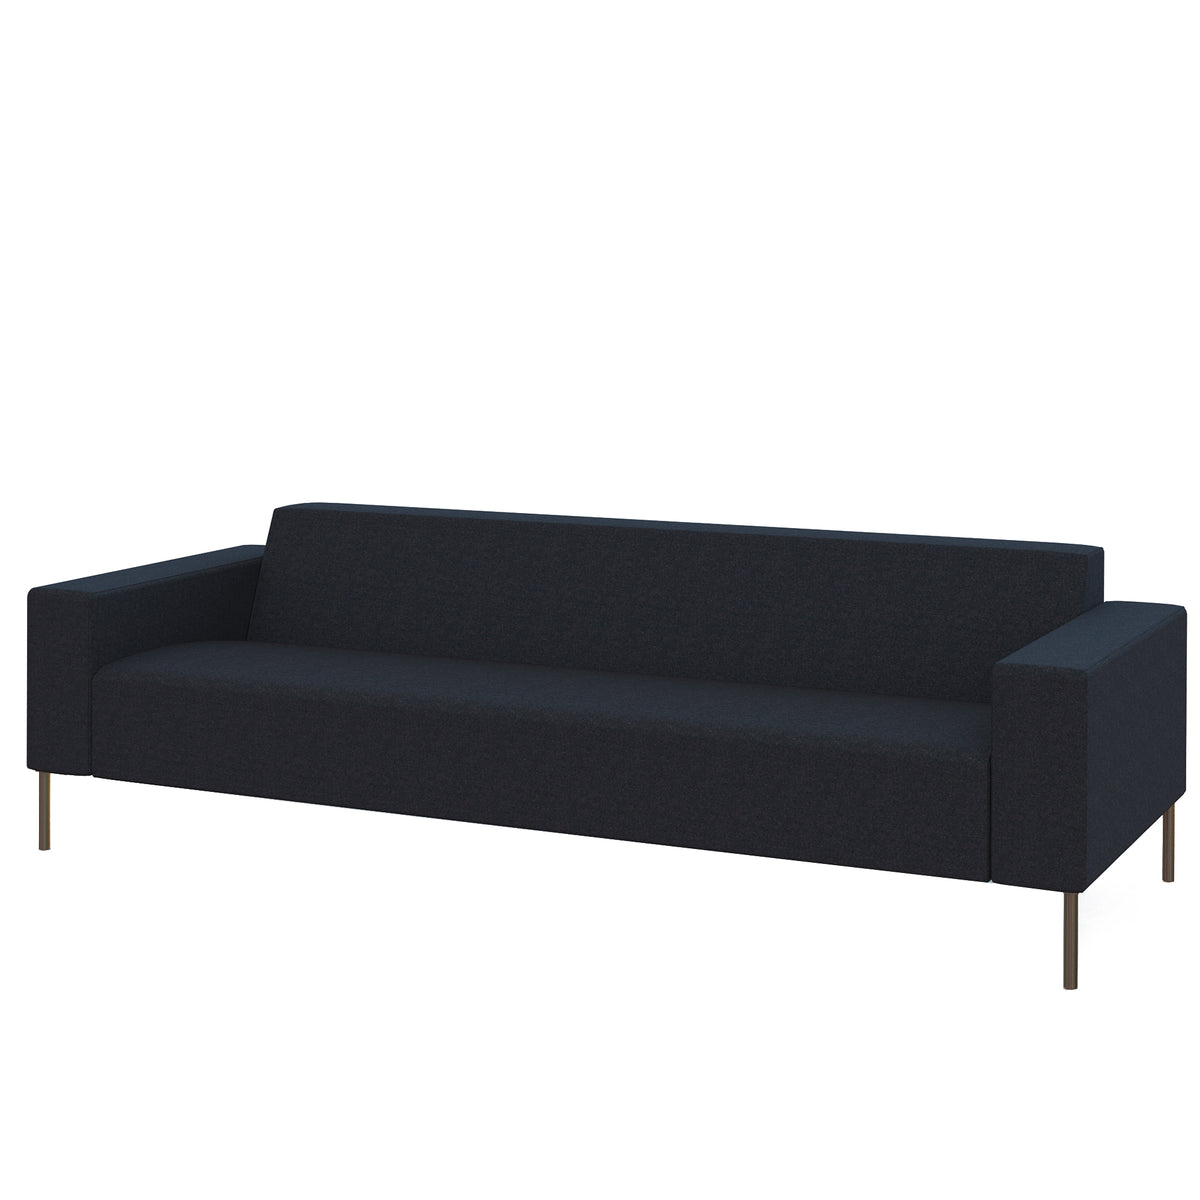 Hitch Mylius HM18 Origin Three Seat Sofa Brushed Stainless Steel Legs Tower